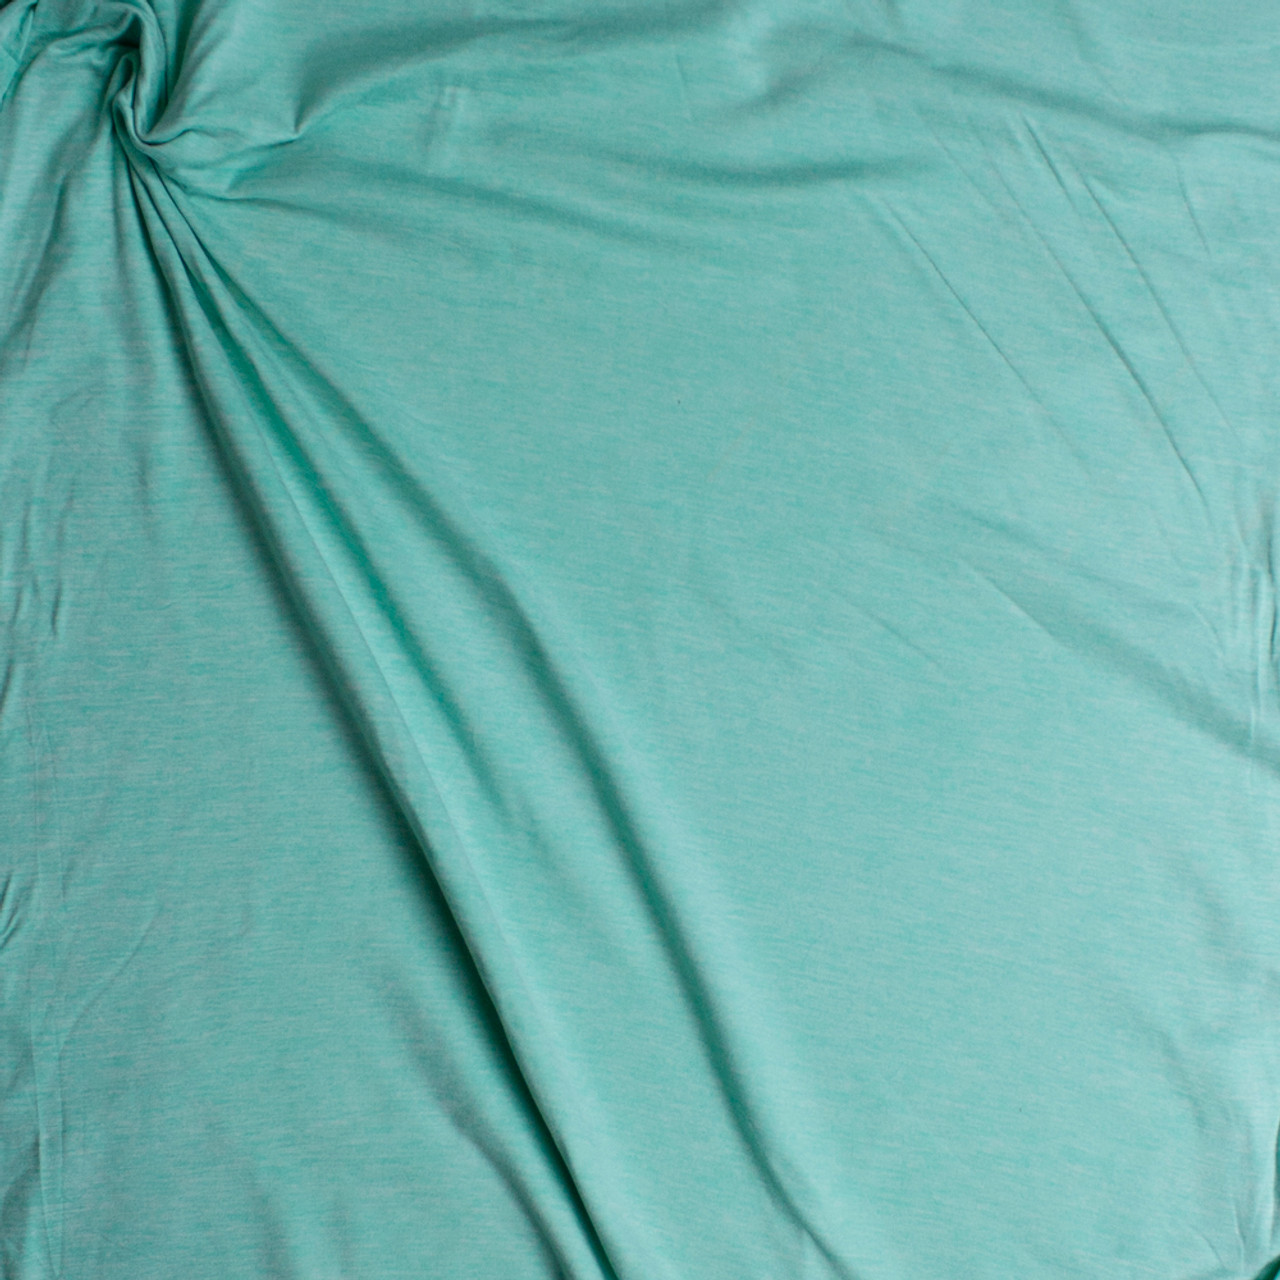 Cali Fabrics Mint Green Heather Double Brushed Poly/Spandex Knit Fabric ...